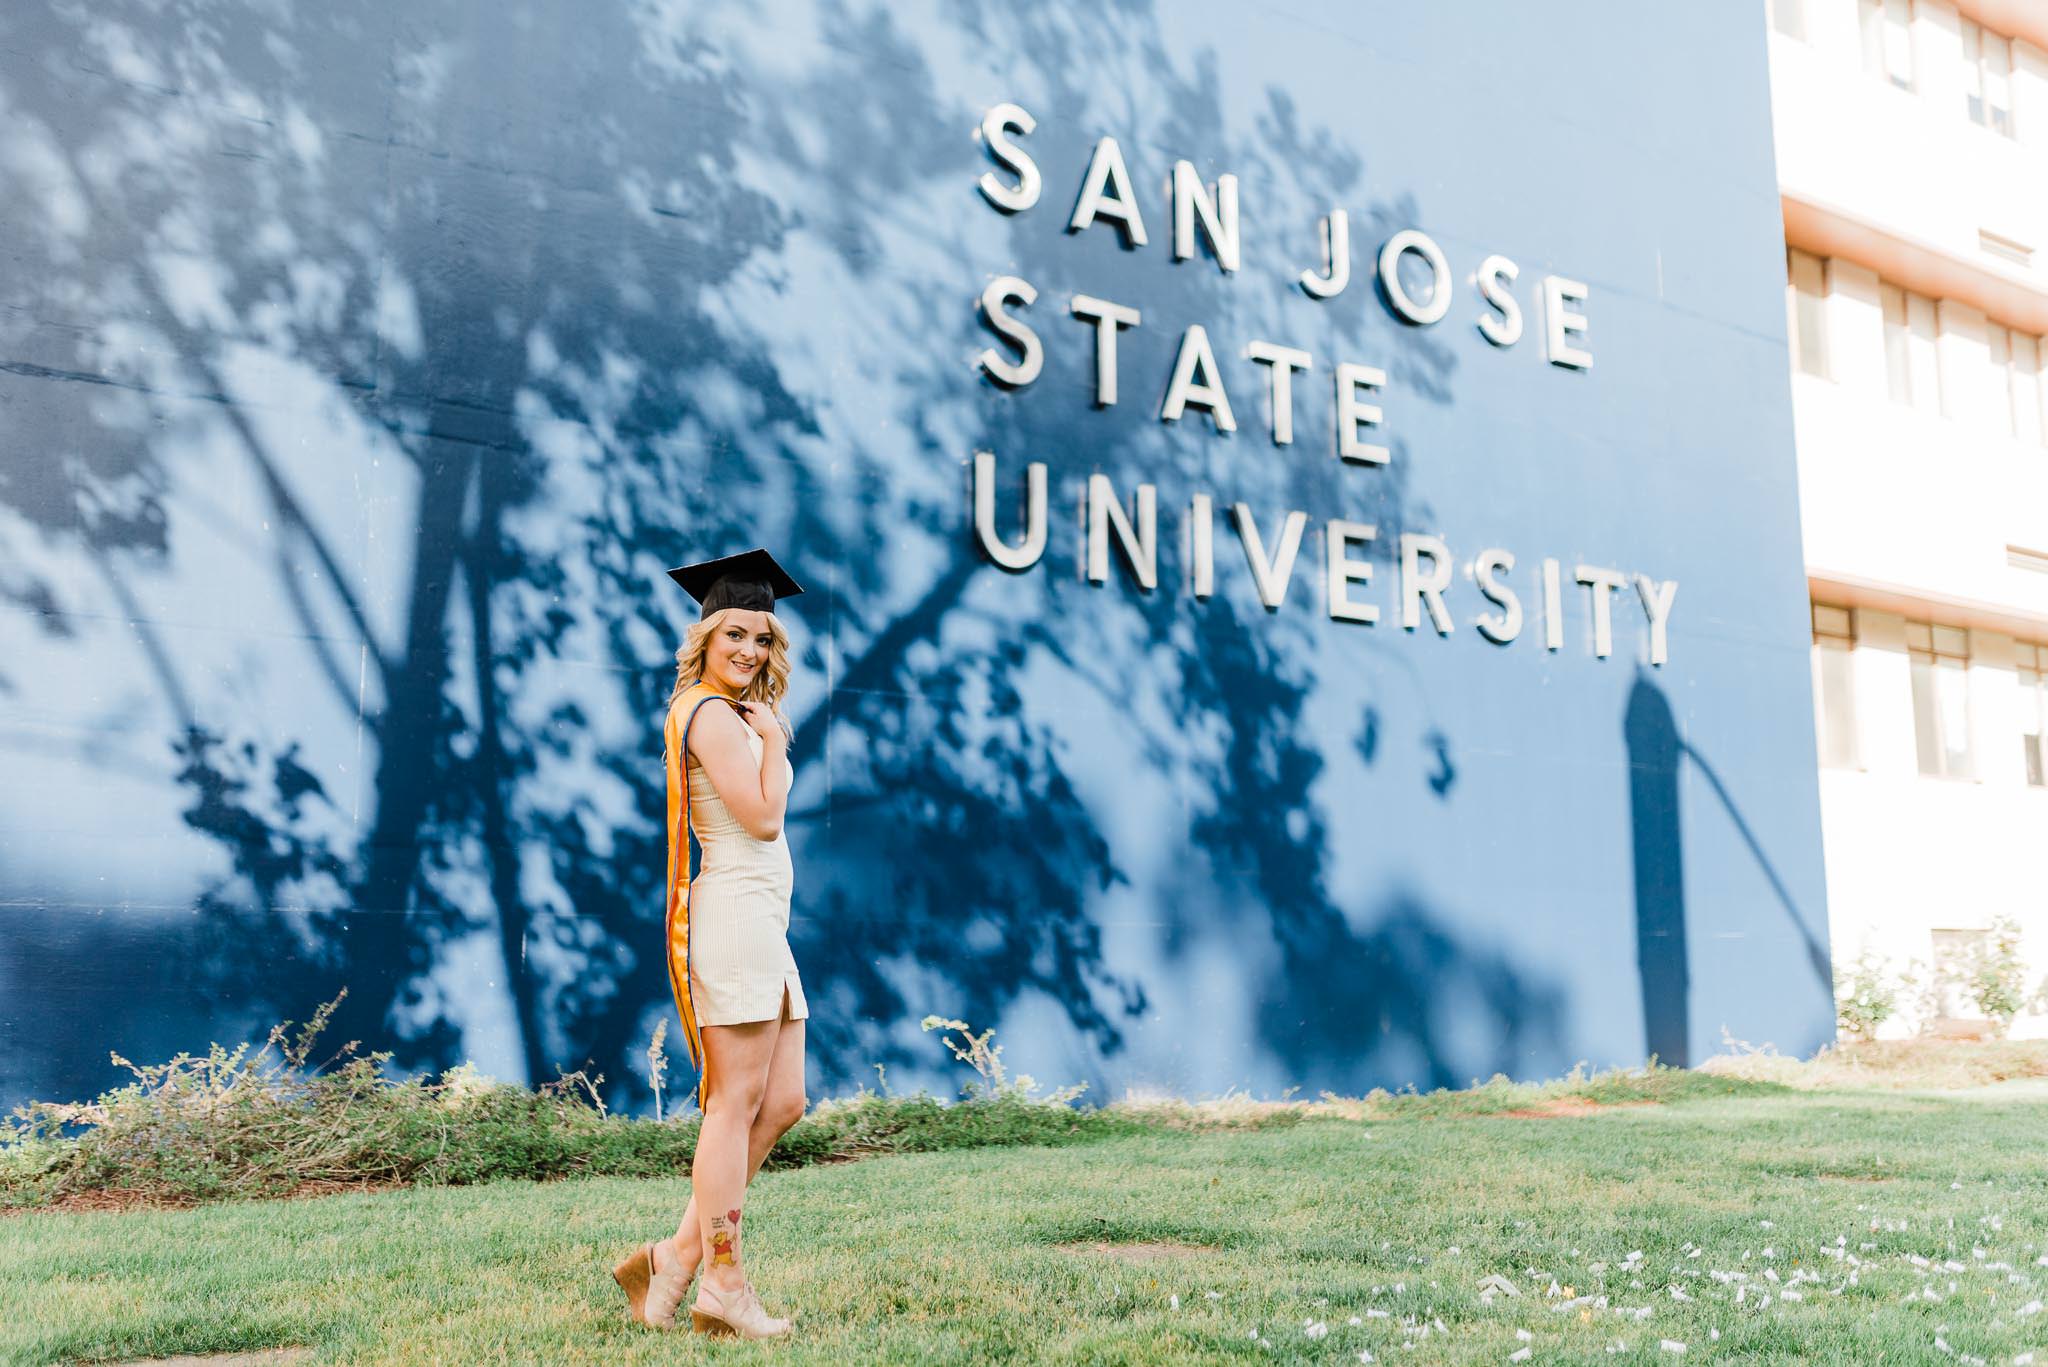 Grad holding stole and wearing graduation cap standing in front of San Jose State University sign